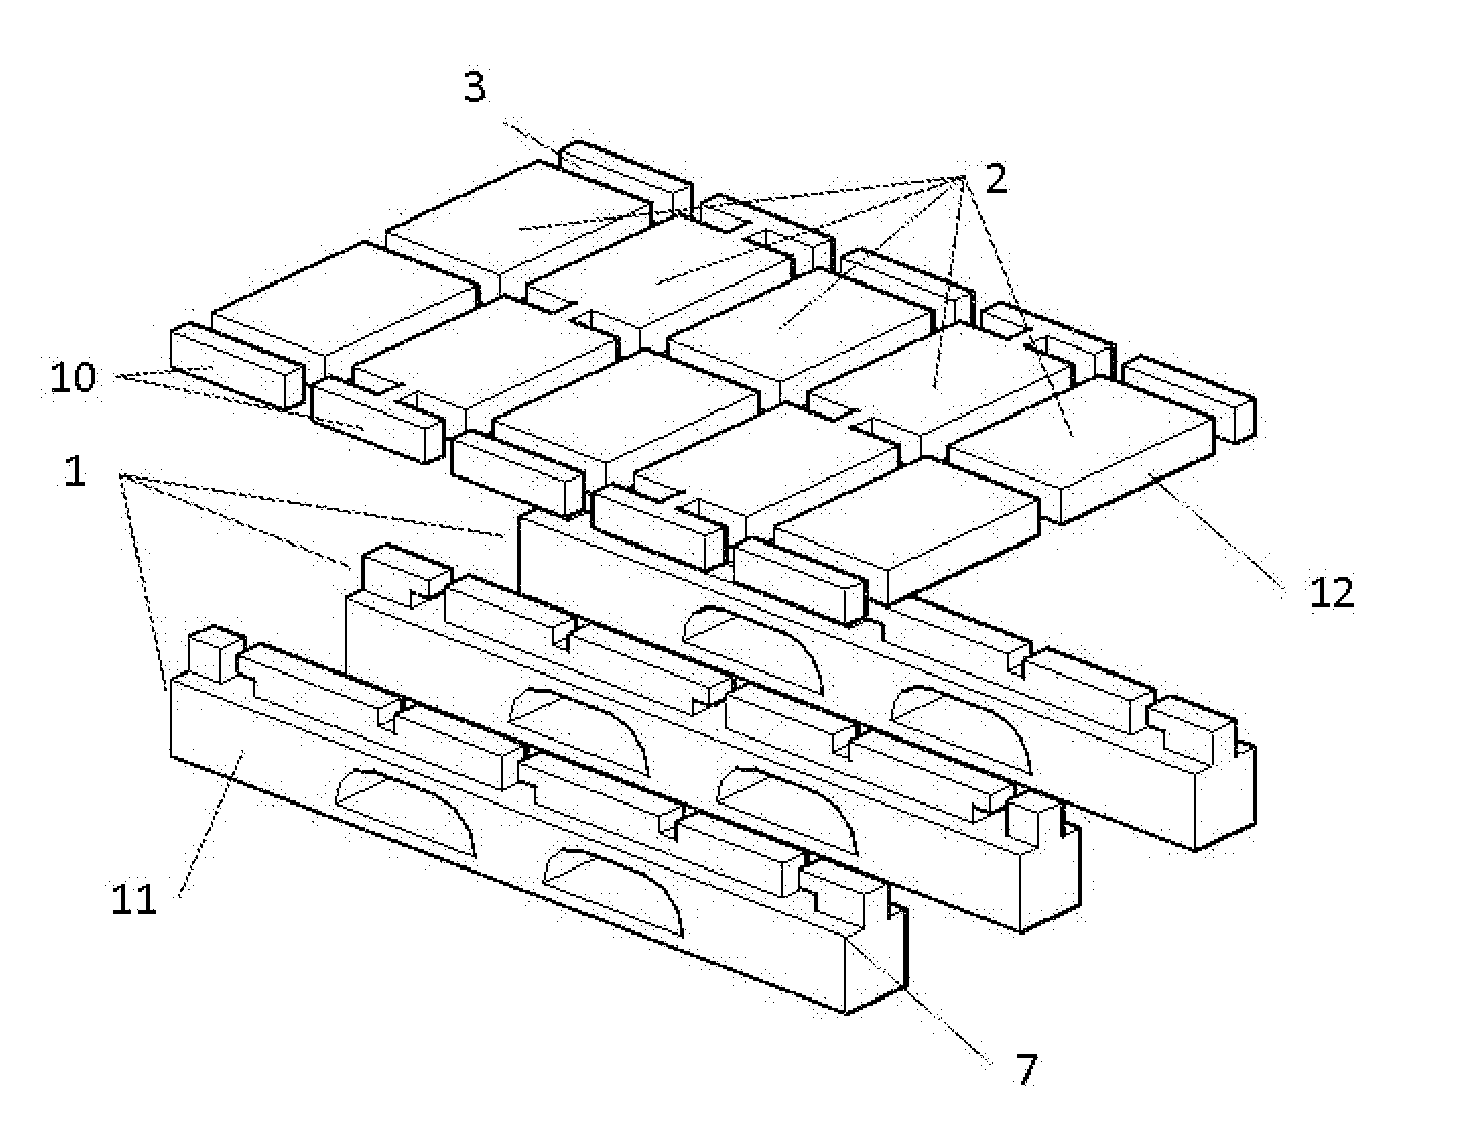 Dismantlable self-assembly structure